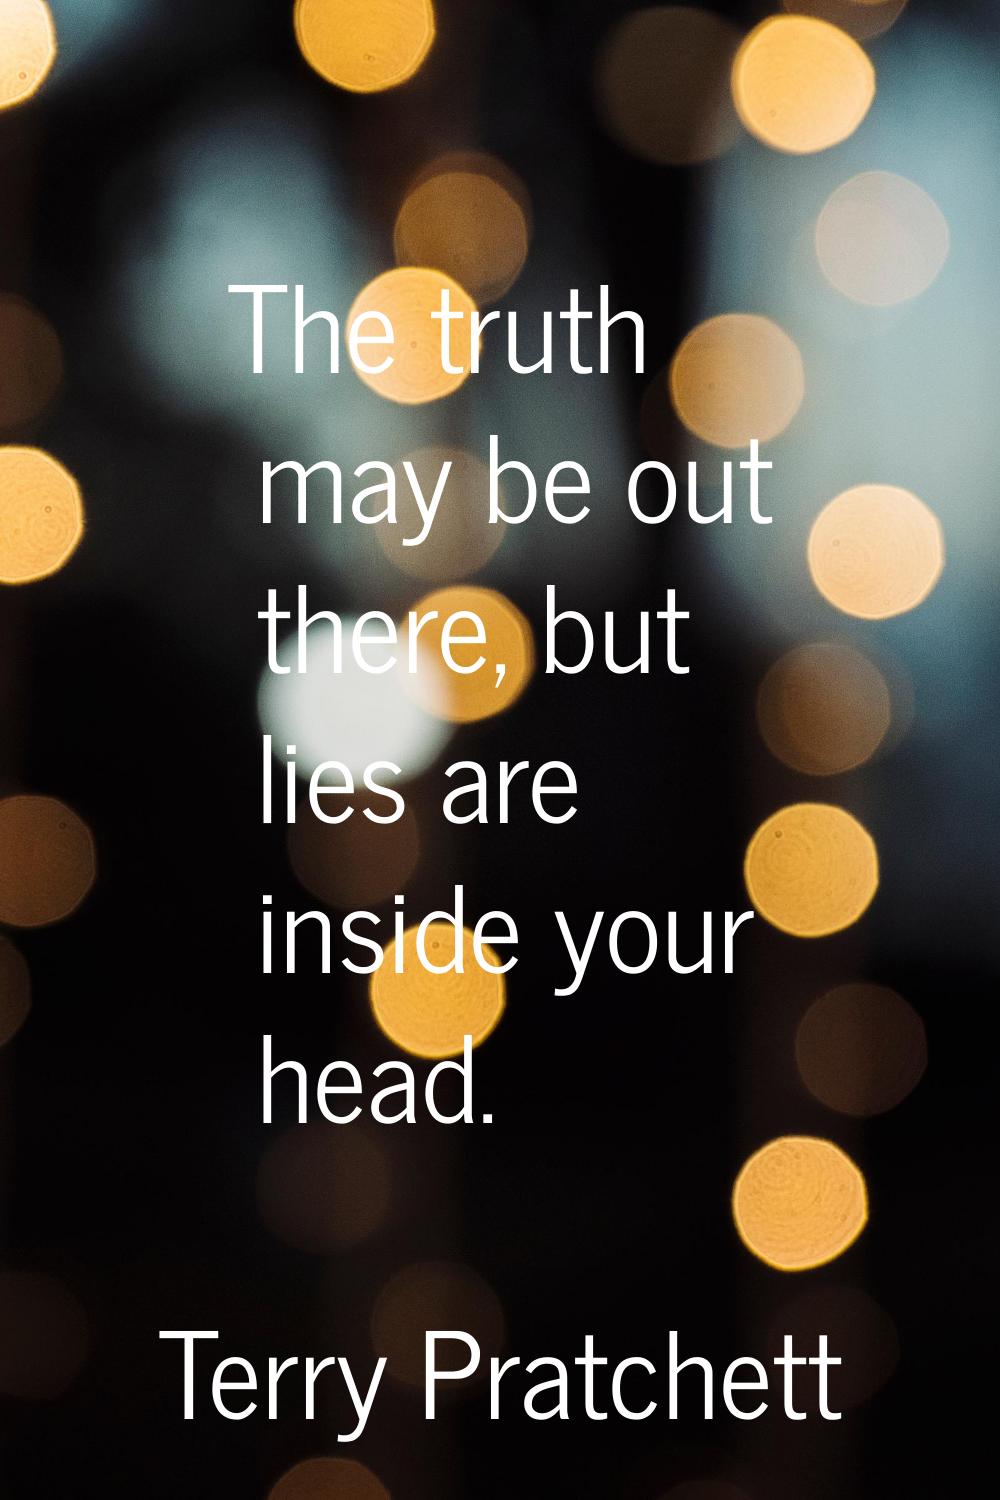 The truth may be out there, but lies are inside your head.